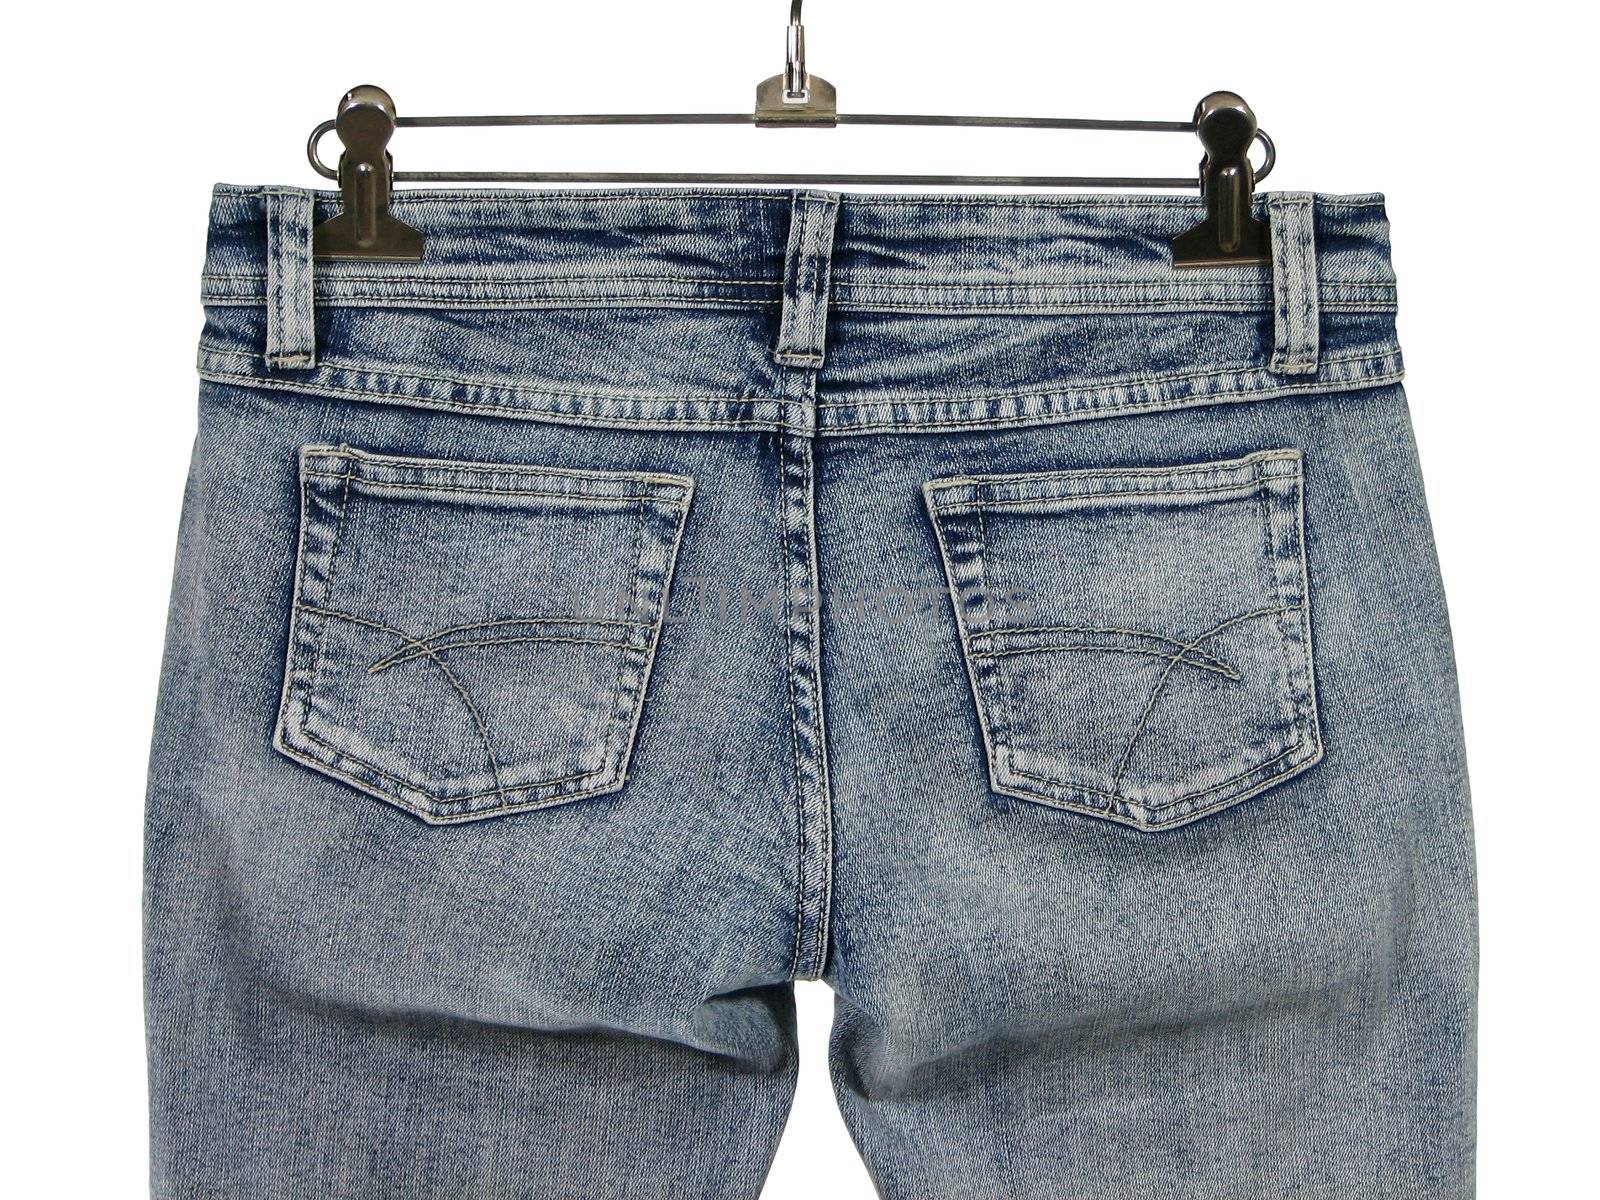 Closeup of blue jeans with pockets, rear view. Isolated on white.